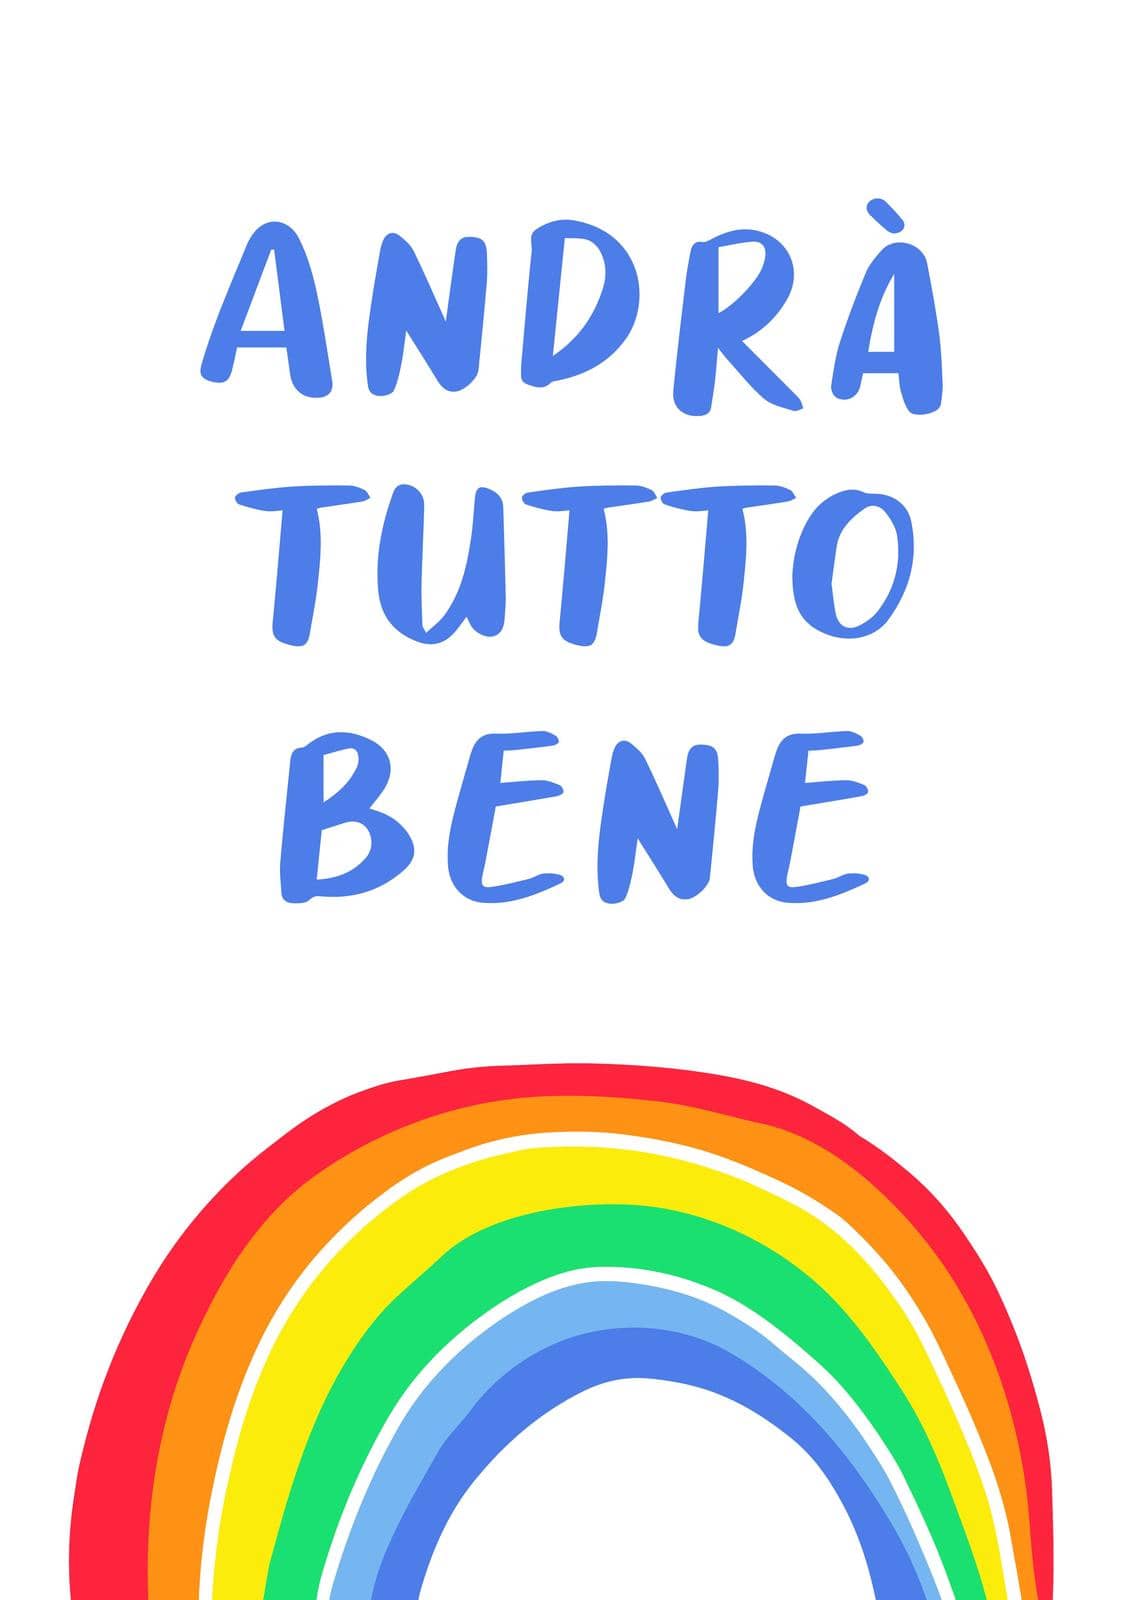 Everything will be ok written in Italian - Andra tutto bene. Simple Rainbow and clouds doodle icon. Hope symbol in coronavirus pandemic. Vector illustration.